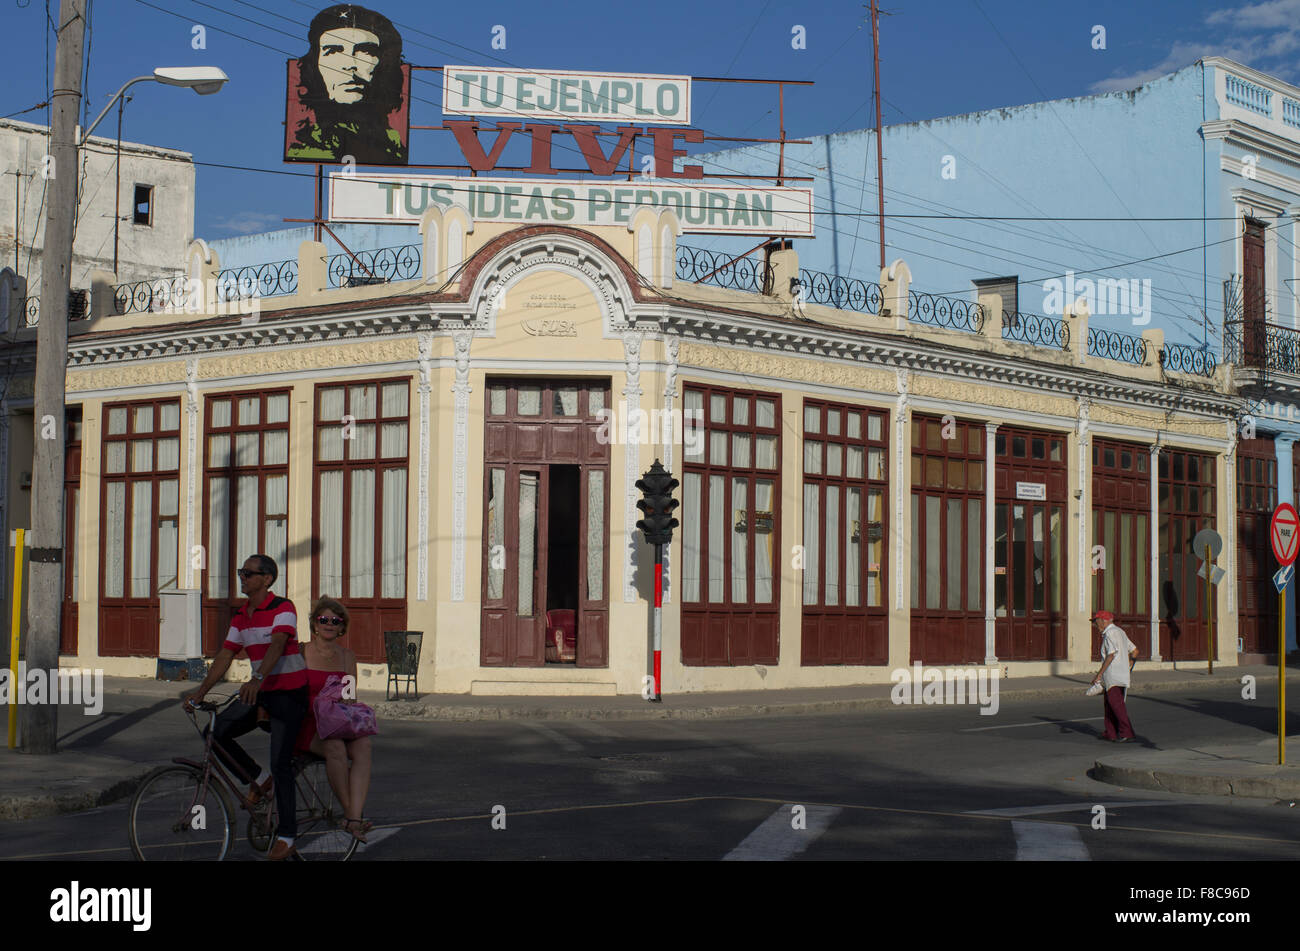 A street corner in Cienfuegos with an image of Che Guevara on a building and the quote 'your example lives, your ideas endure' Stock Photo